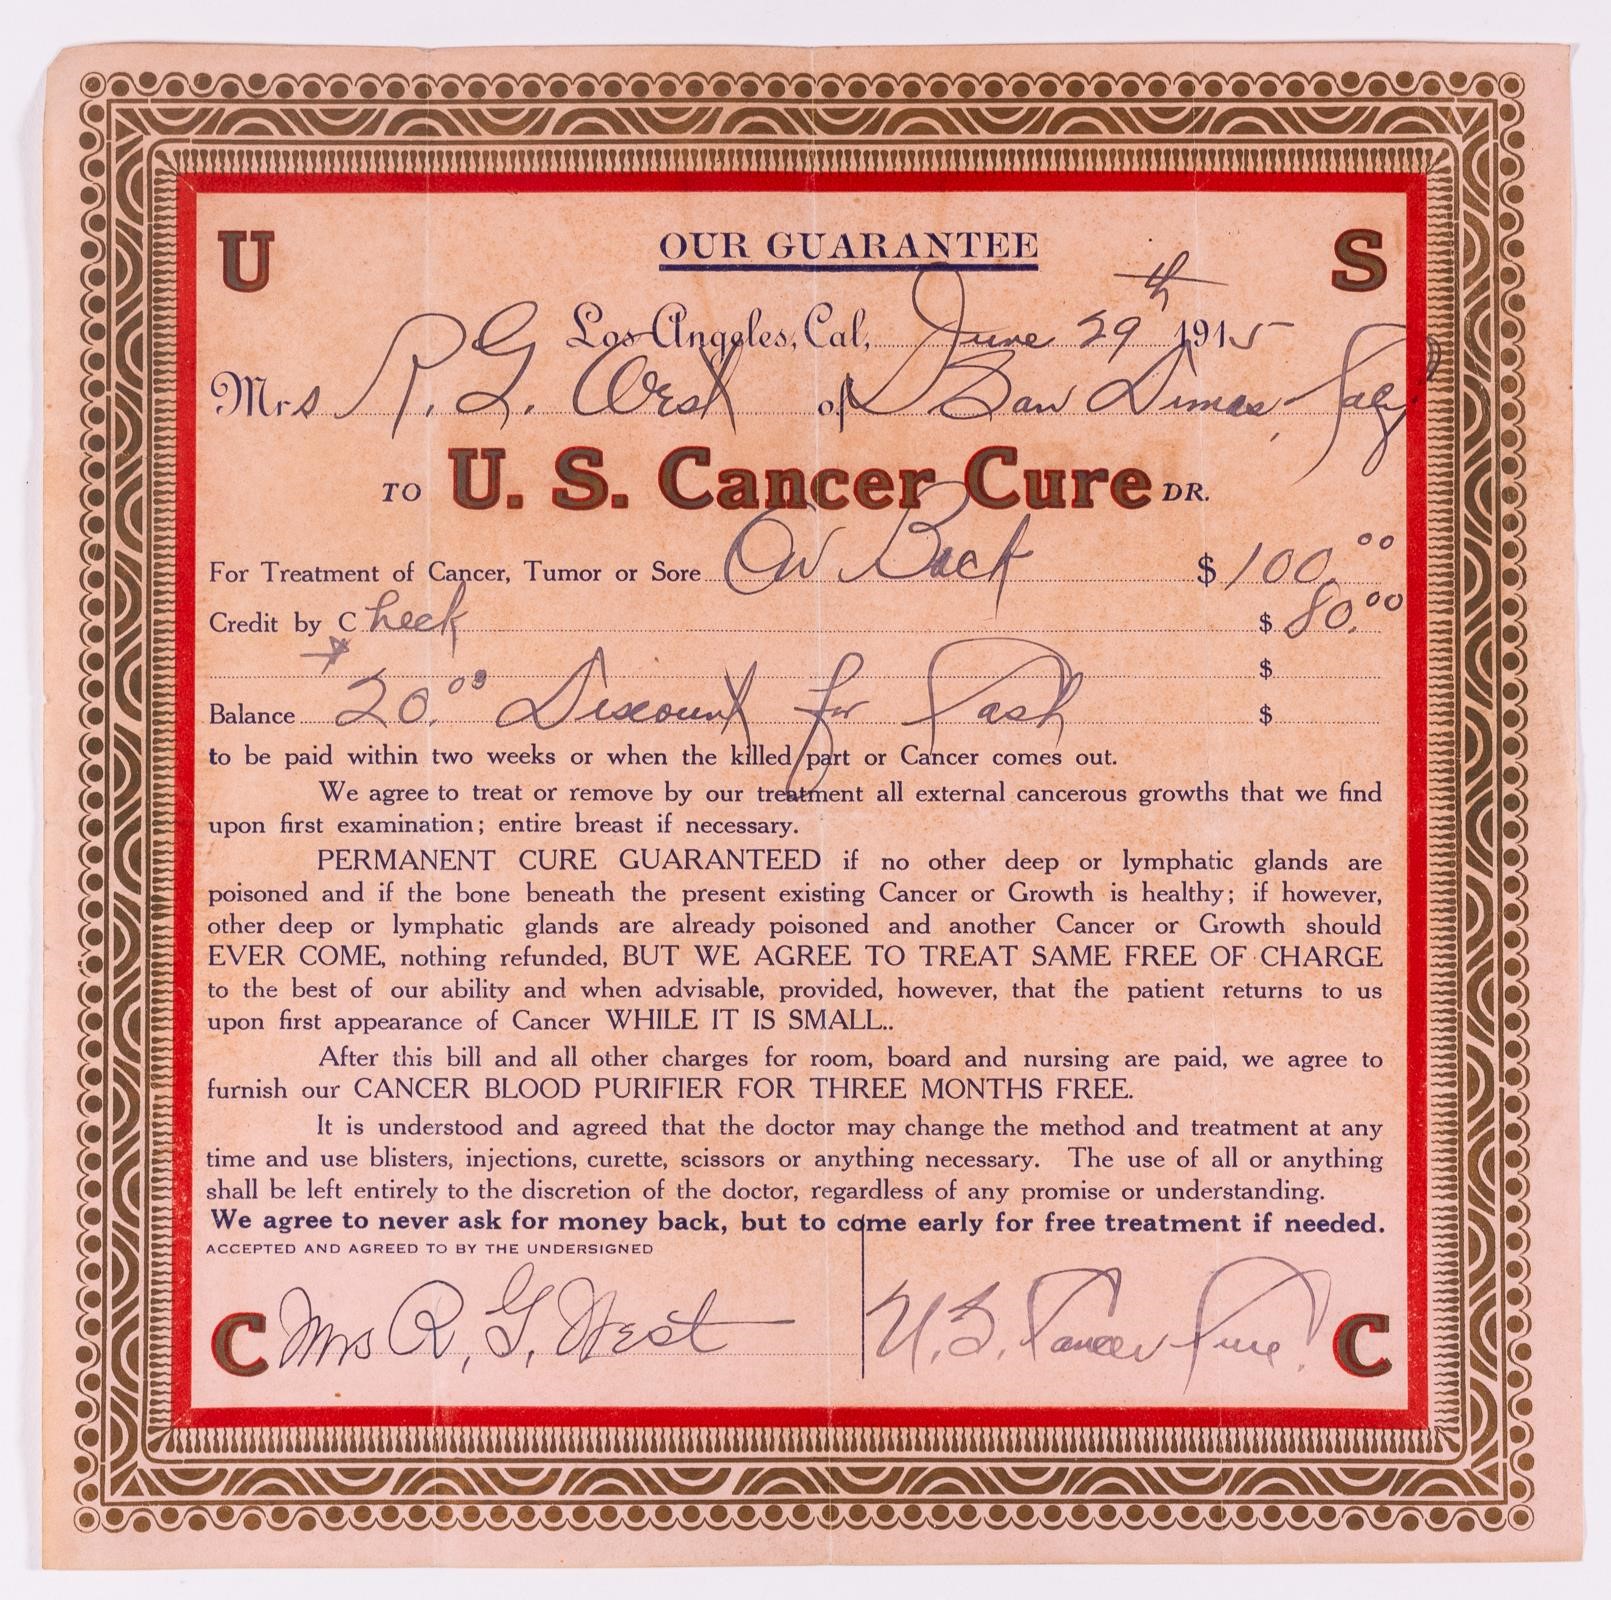 SCARCE US CANCER CURE CERTIFICATE